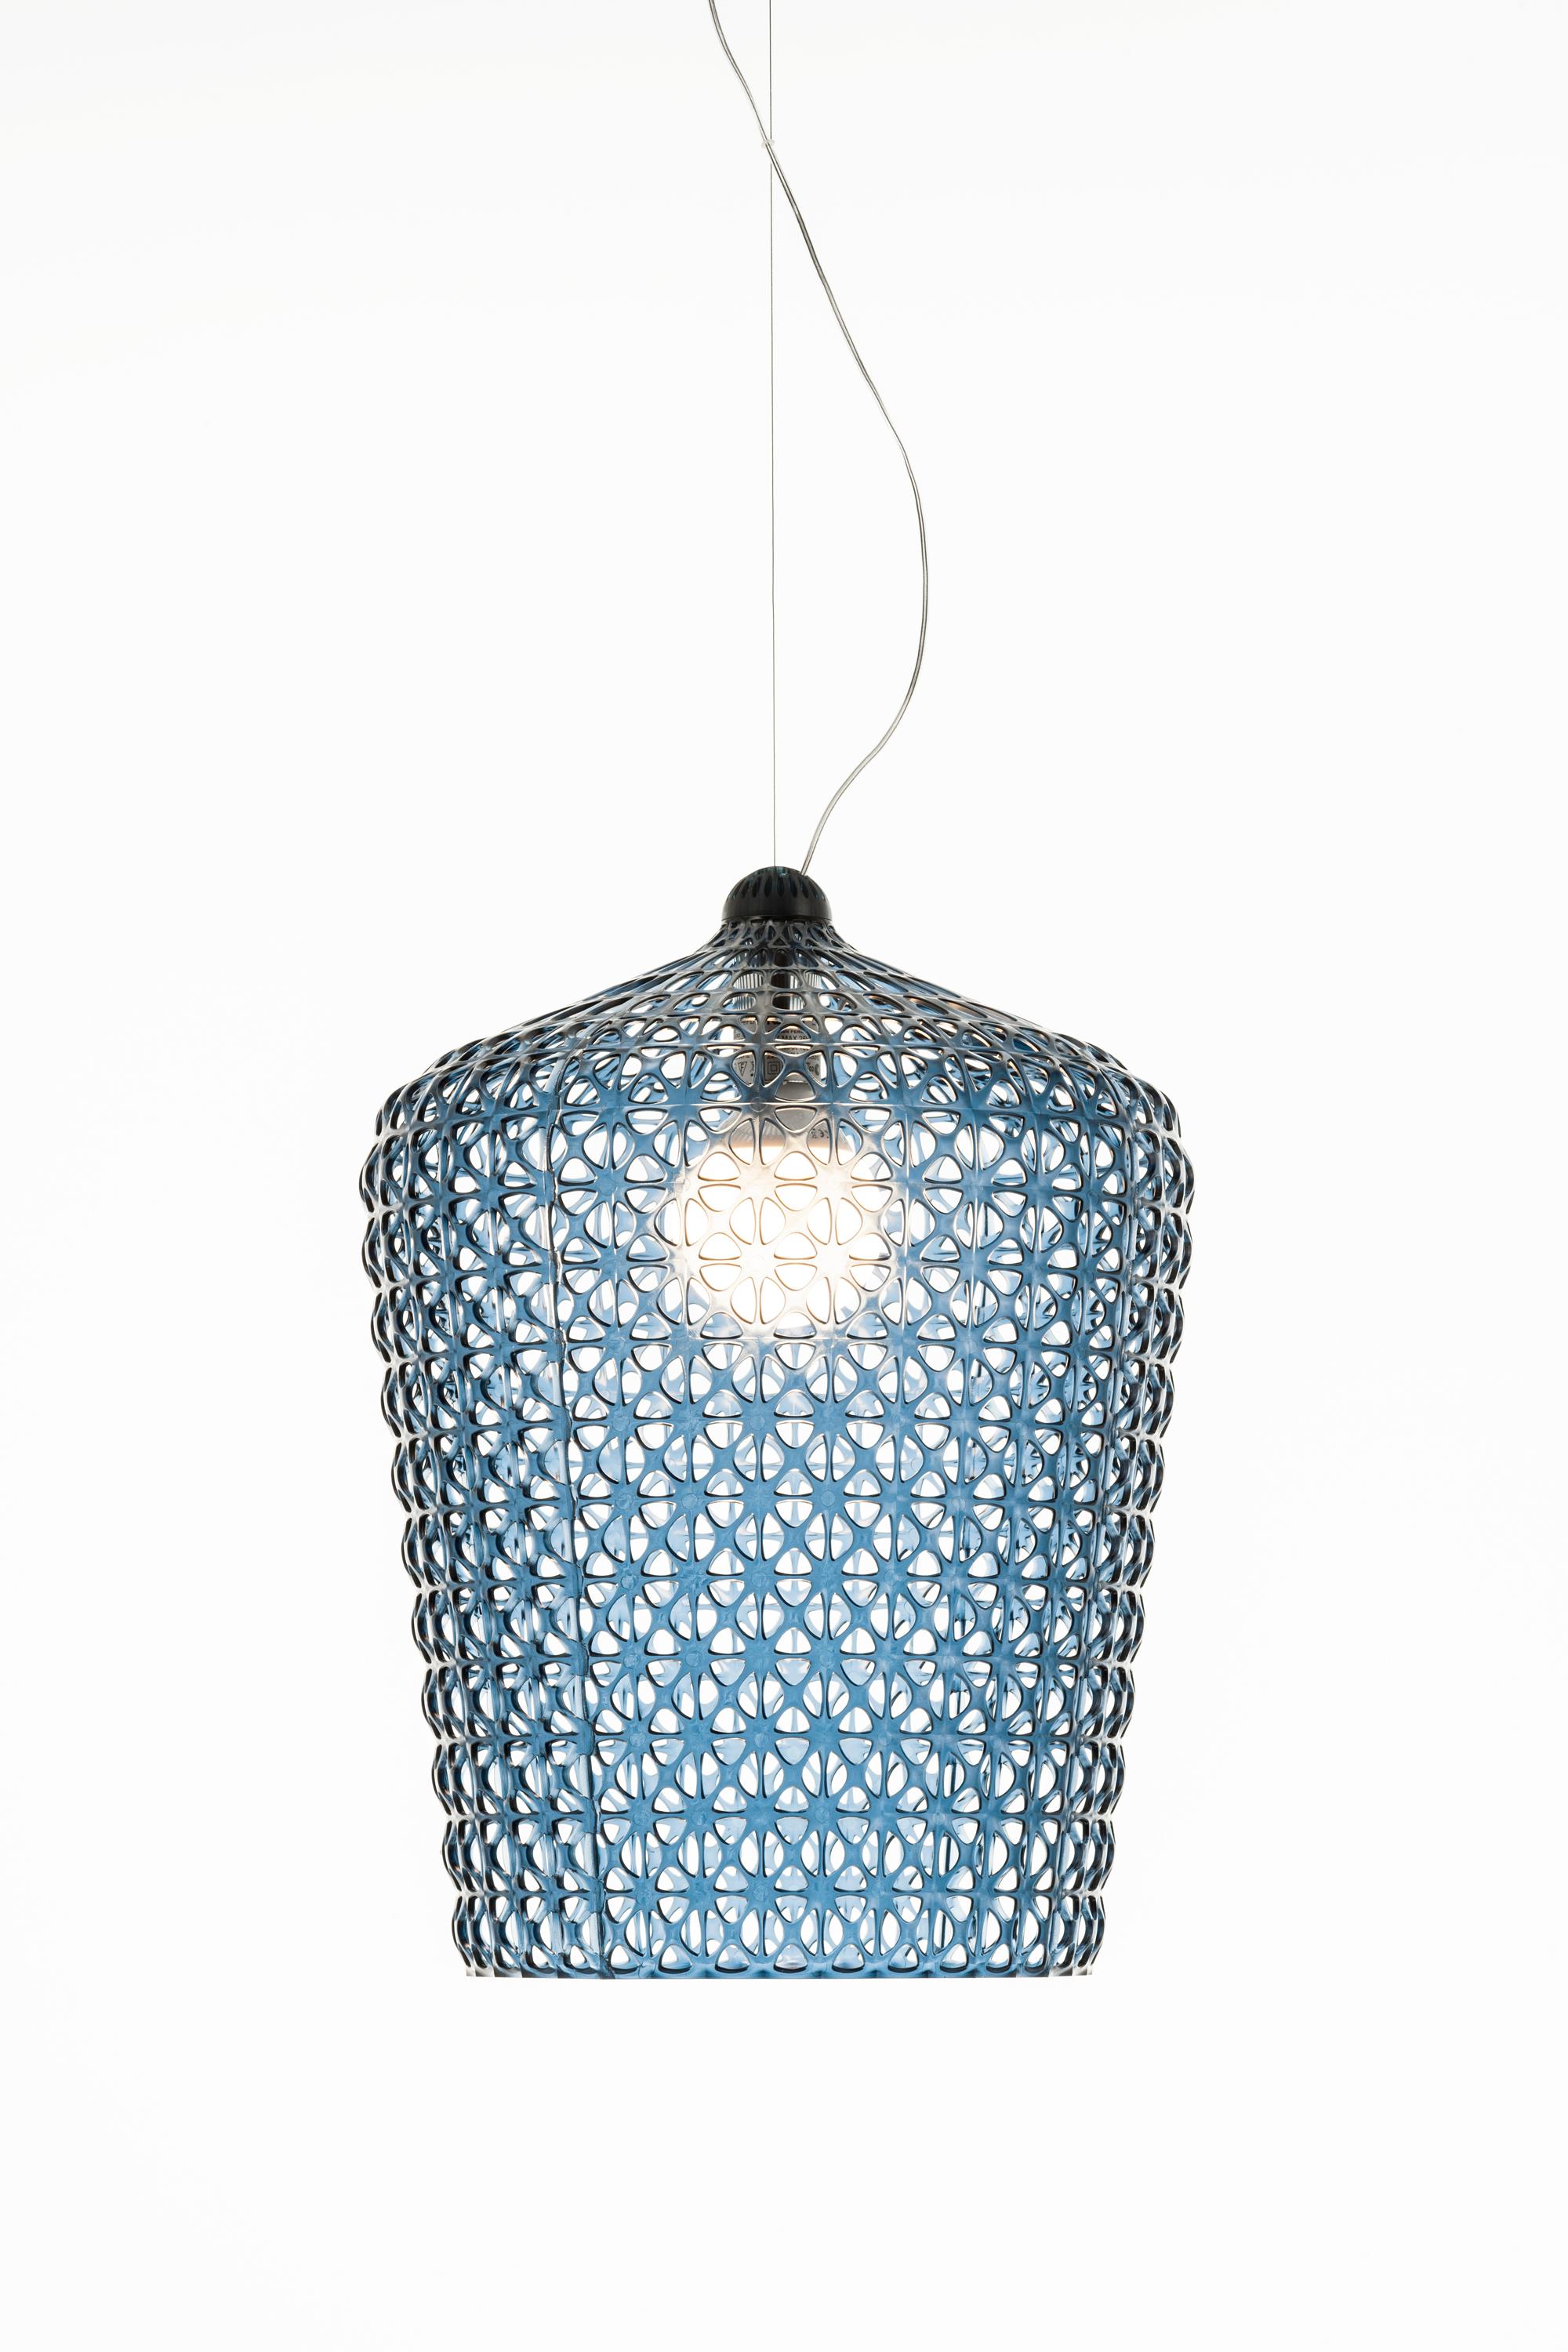 Kabuki pendant light in blue.

Dimensions: Height: 19.67 in.; Diameter: 23 in. Made of: Thermoplastic Technopolymer. Assembly required. Voltage: 120. Cord length (inches): 28.75-105.50. Not adaptable for other countries. Integrated LED. Kelvins: